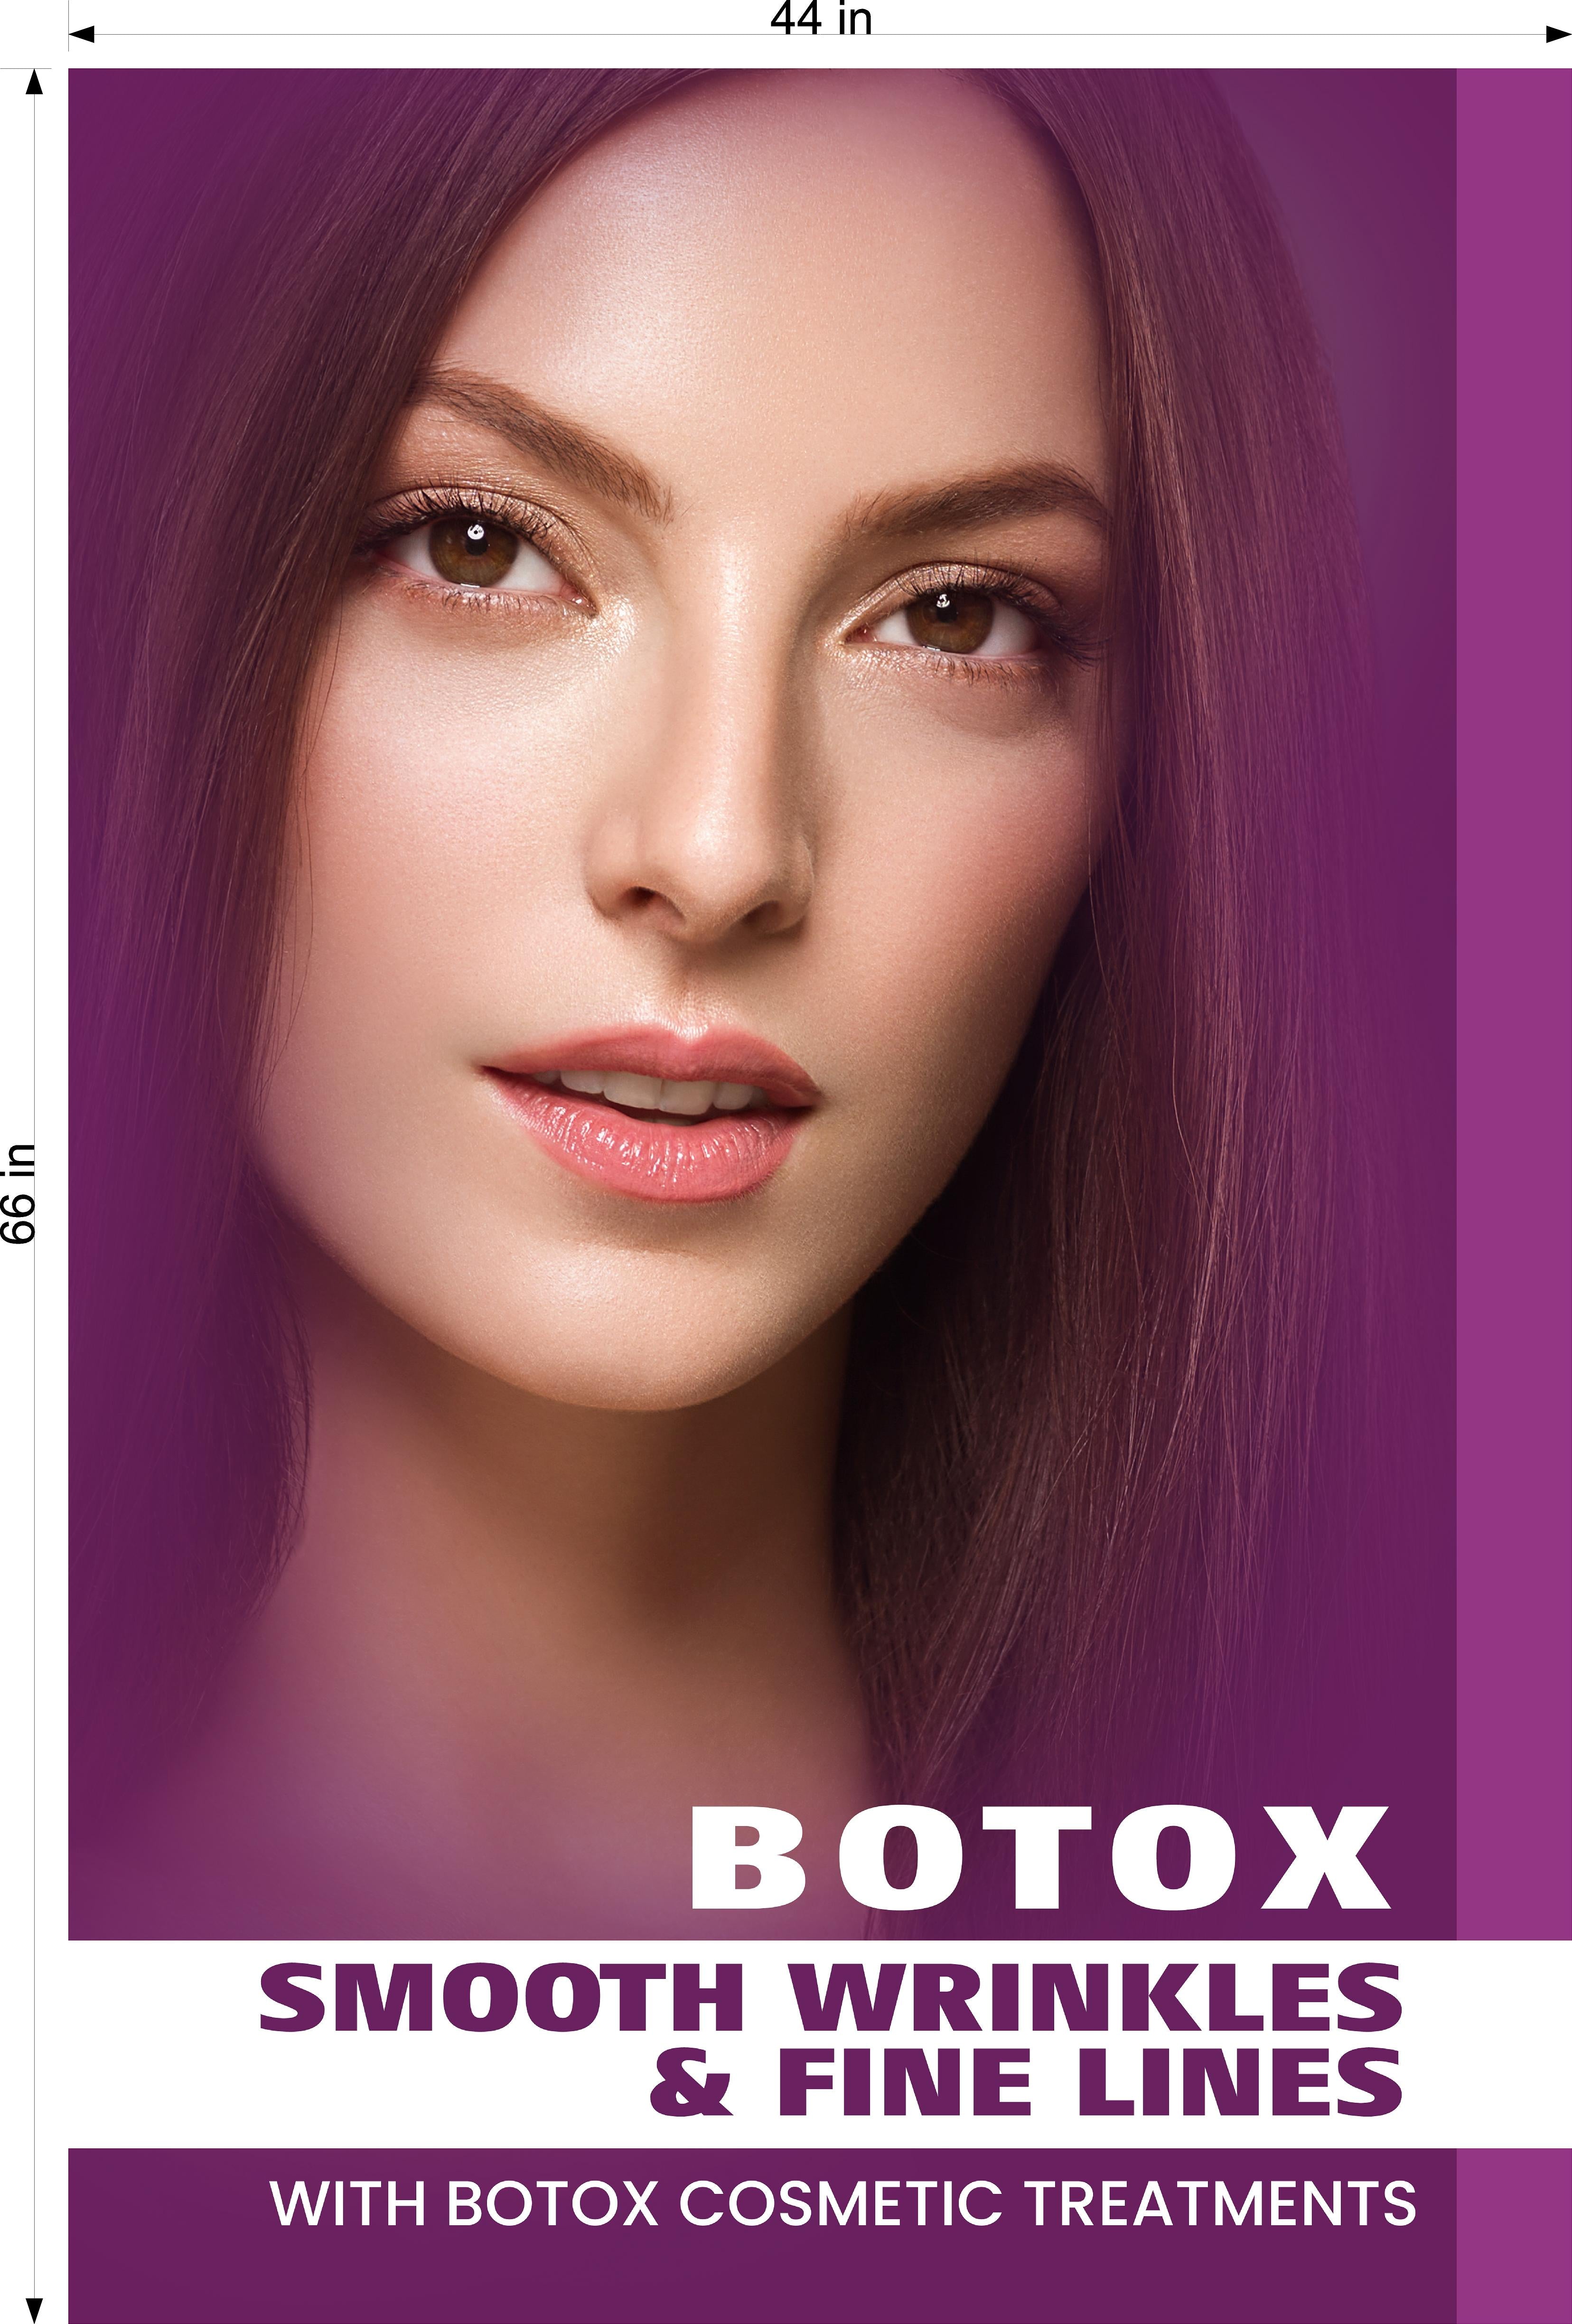 Botox 13 Photo-Realistic Paper Poster Premium Interior Inside Sign Advertising Marketing Wall Window Non-Laminated Vertical